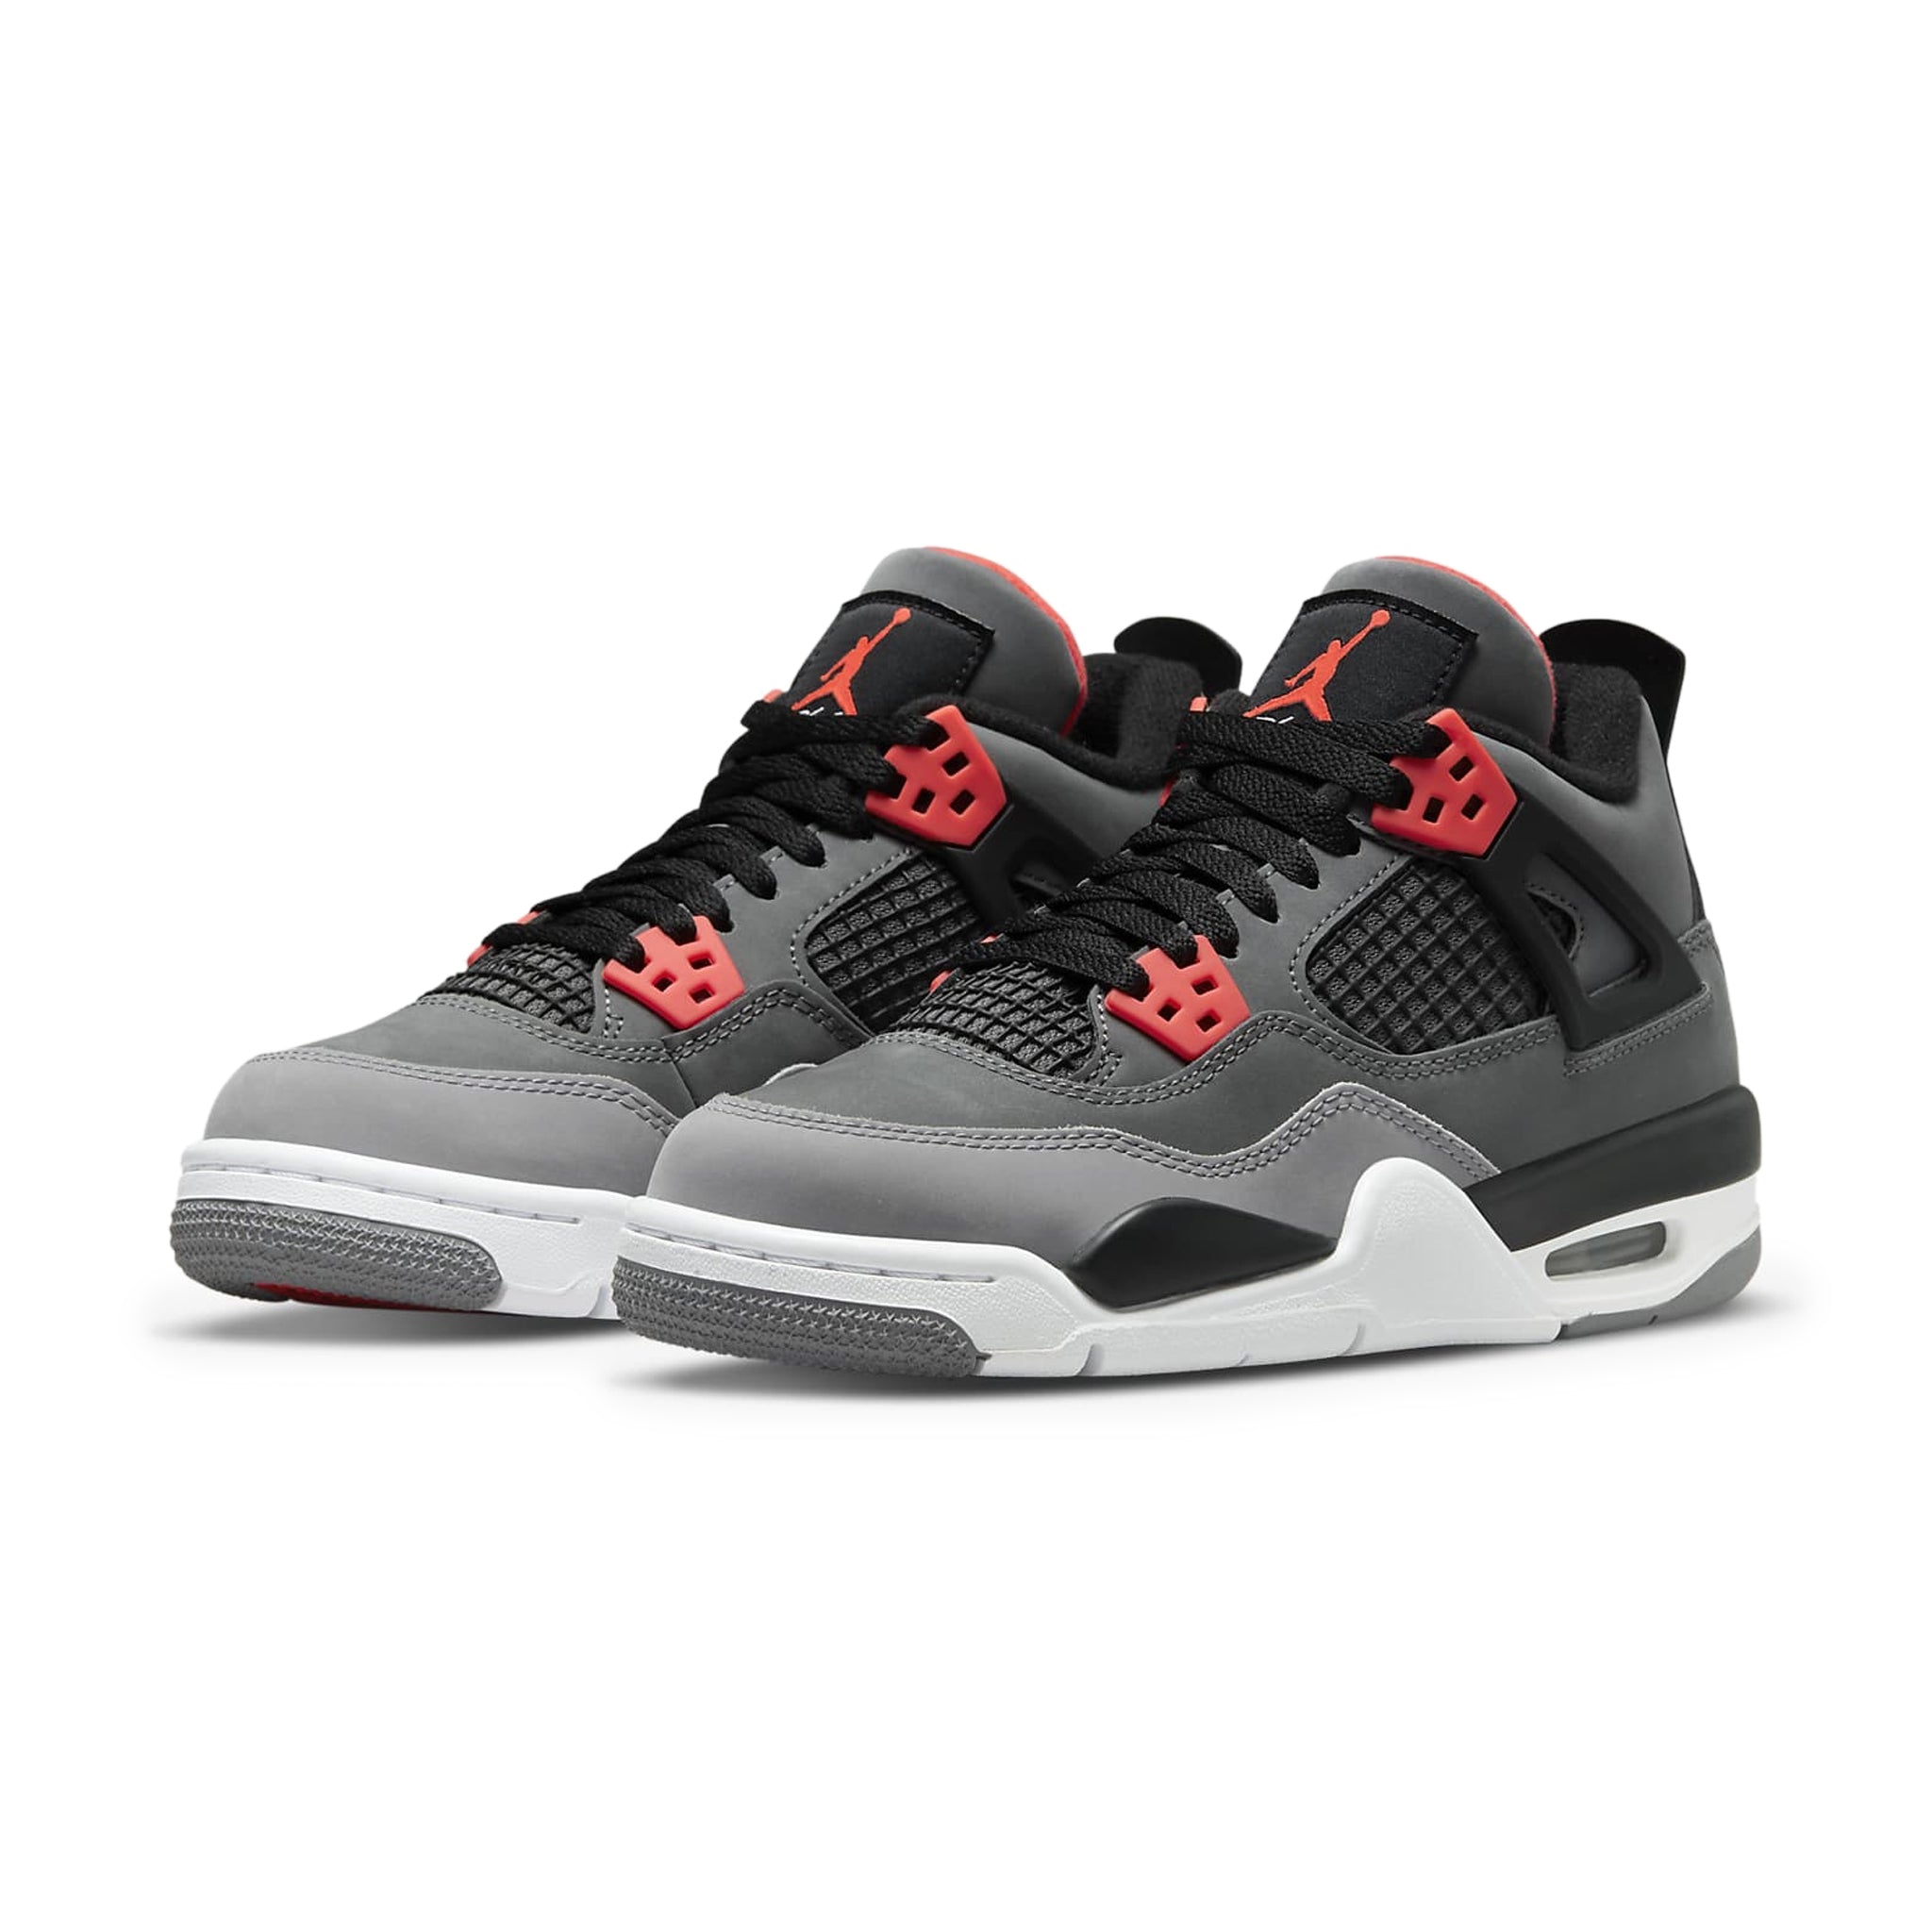 Front side view of Air Jordan 4 Retro Infrared (GS) 408452-061